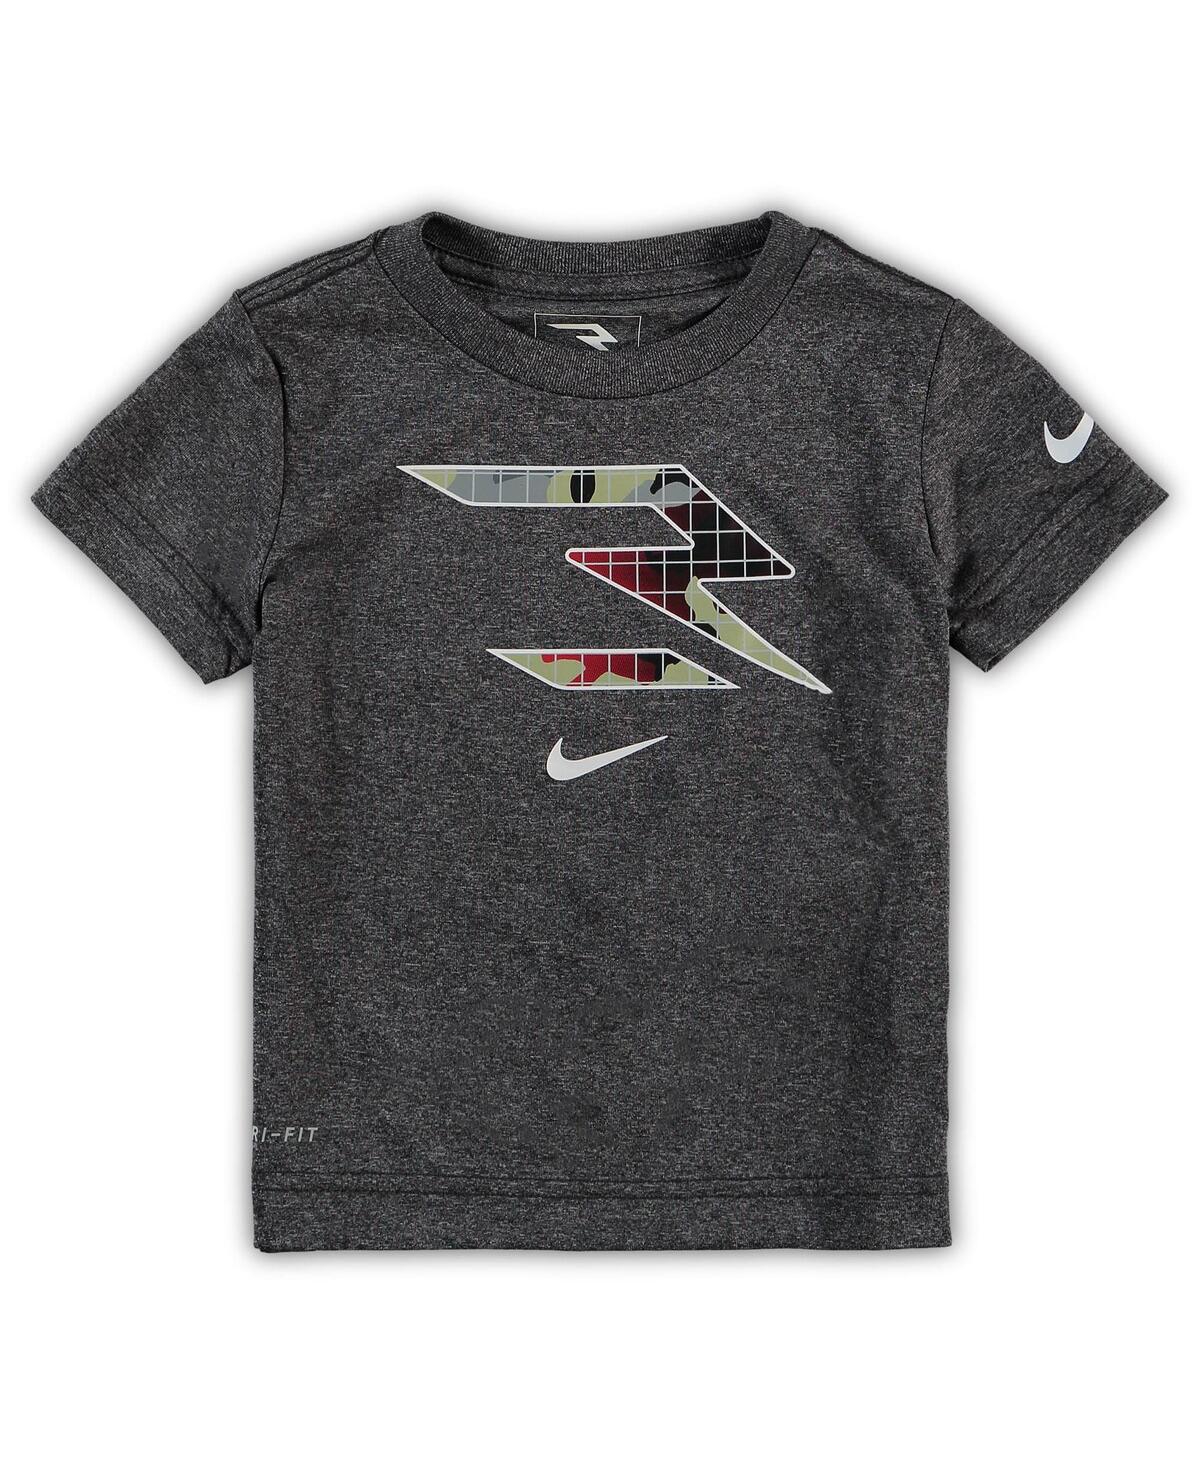 Nike 3brand By Russell Wilson Babies' Toddler Boys And Girls Heathered Black  Combat Fill Performance T-shirt